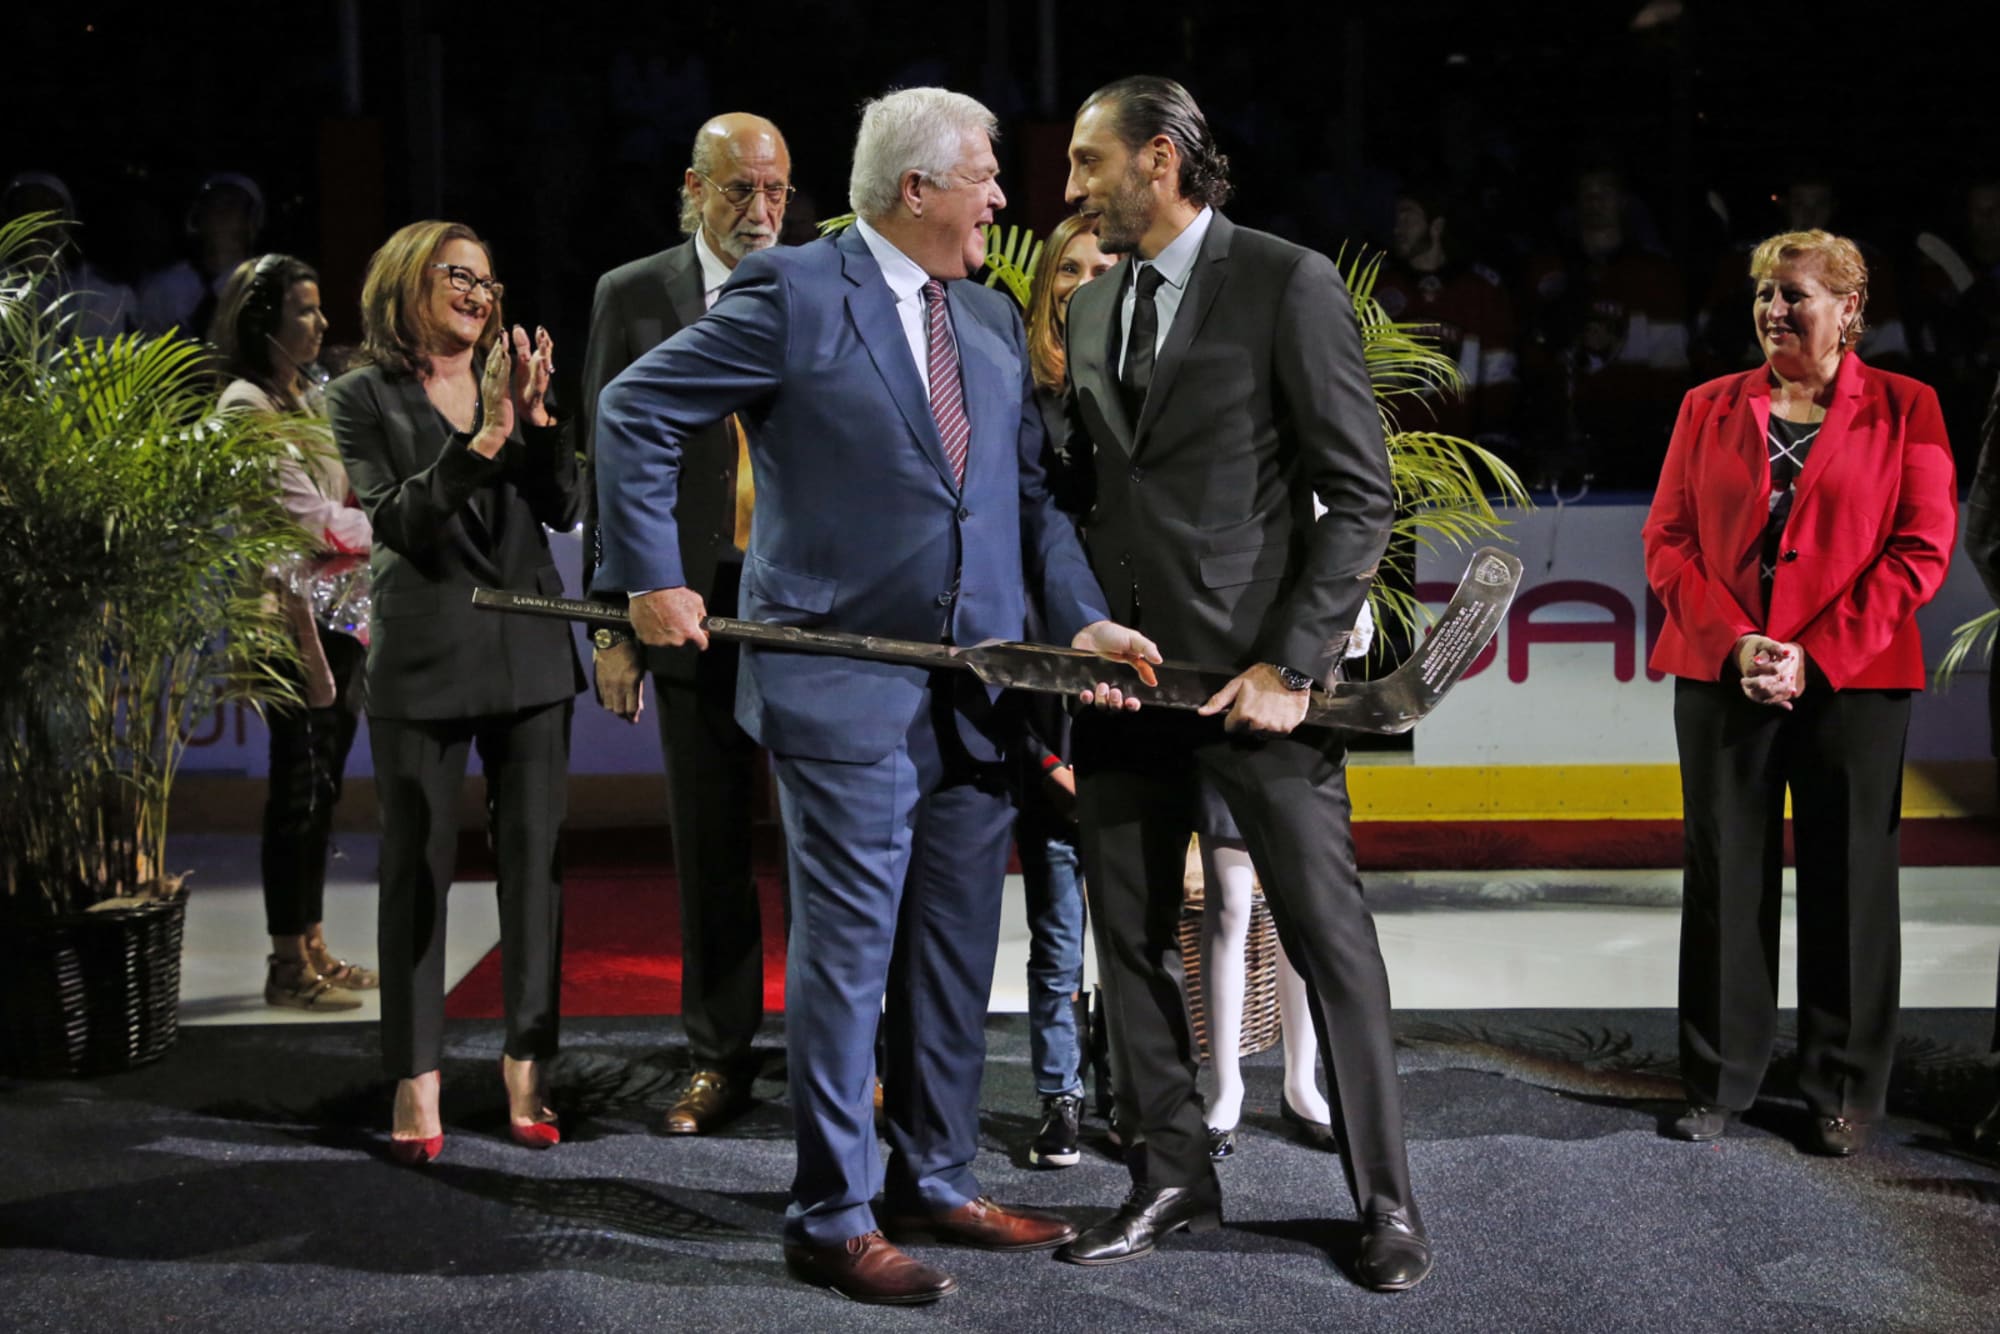 Will Vancouver Canucks, like Panthers, retire Roberto Luongo's No. 1?